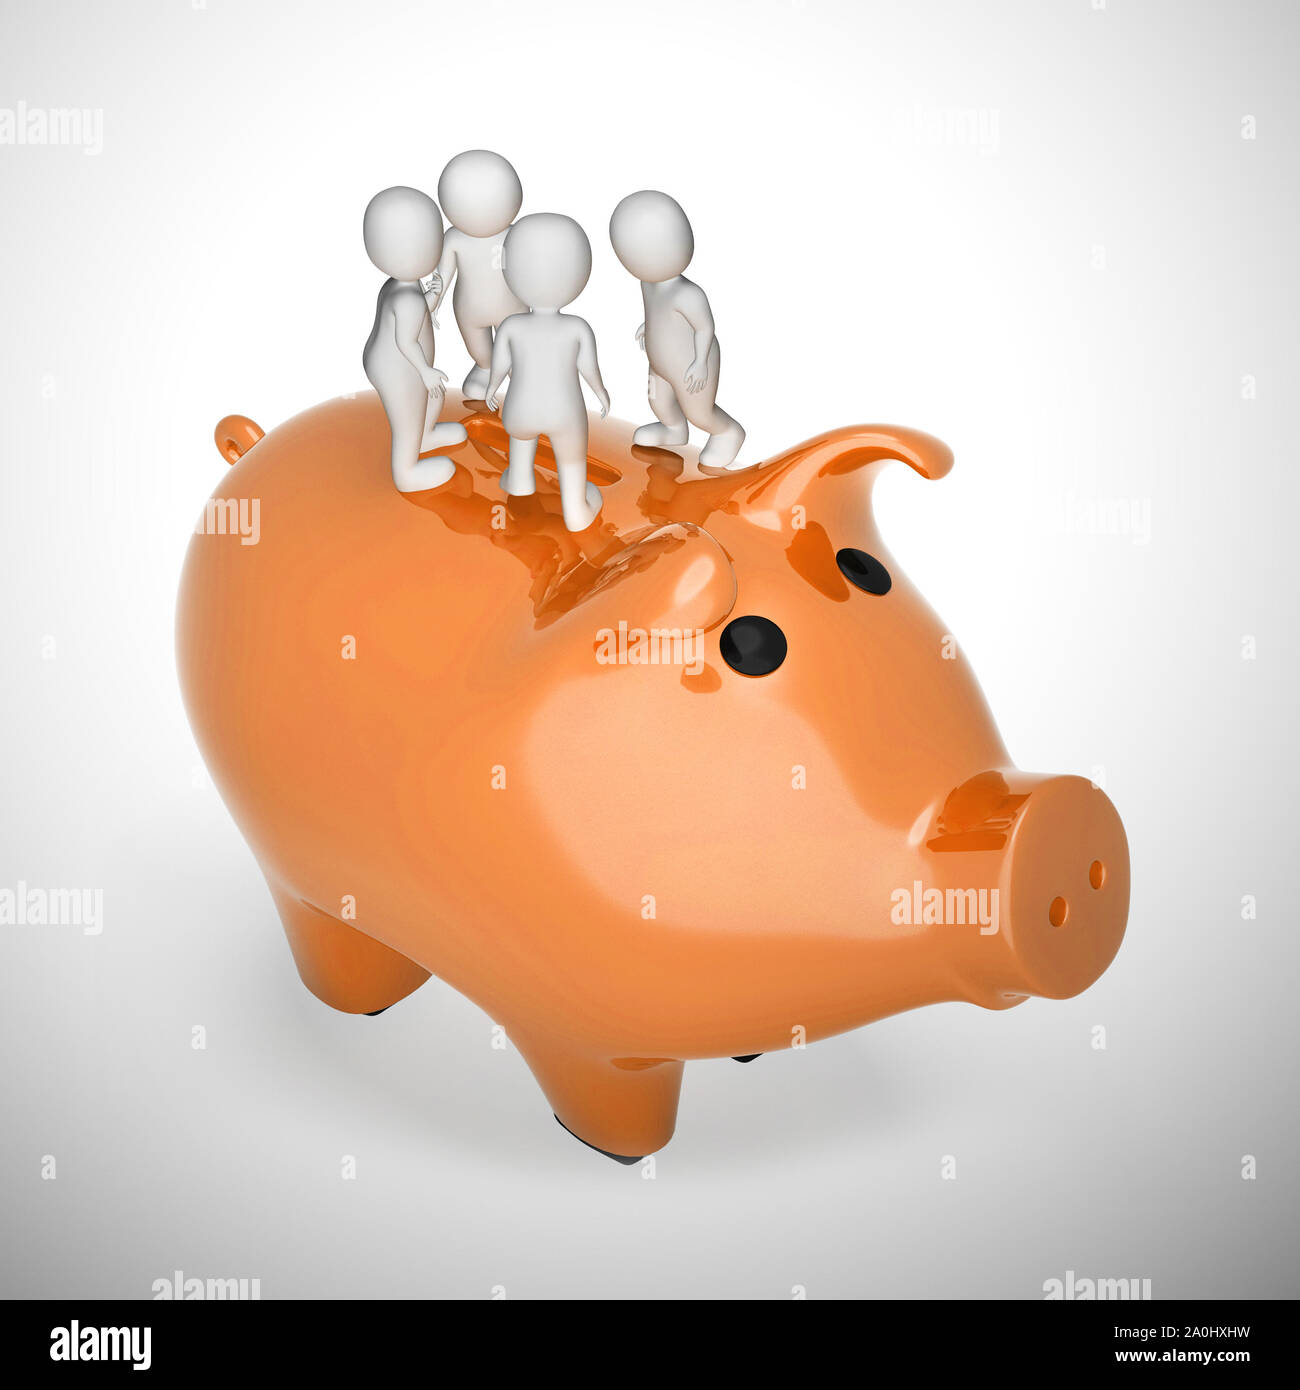 Piggy bank on money box shows saving funds for a rainy day. Get rich and wealthy by putting away cash - 3d illustration Stock Photo